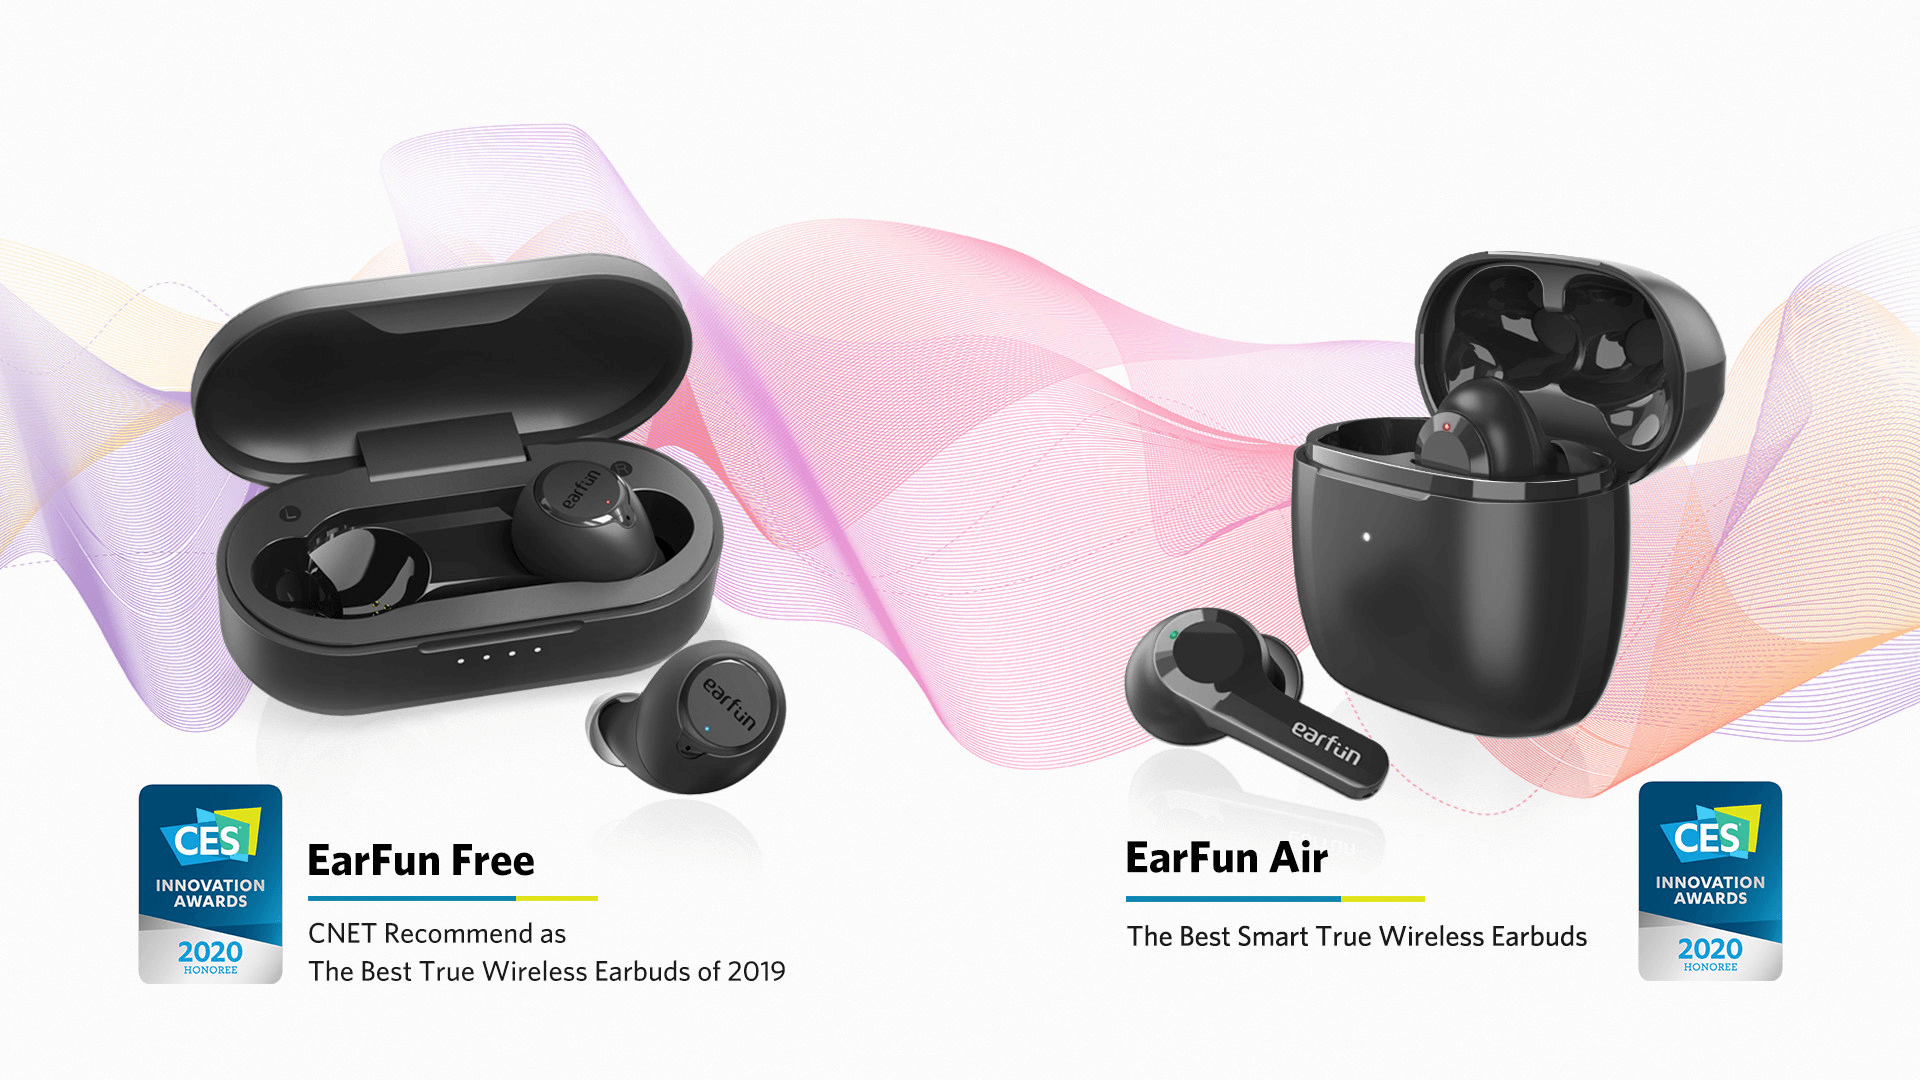 EarFun Wins Second CES Honor with Upcoming EarFun Air Earbuds, Promises New Tech for 2020